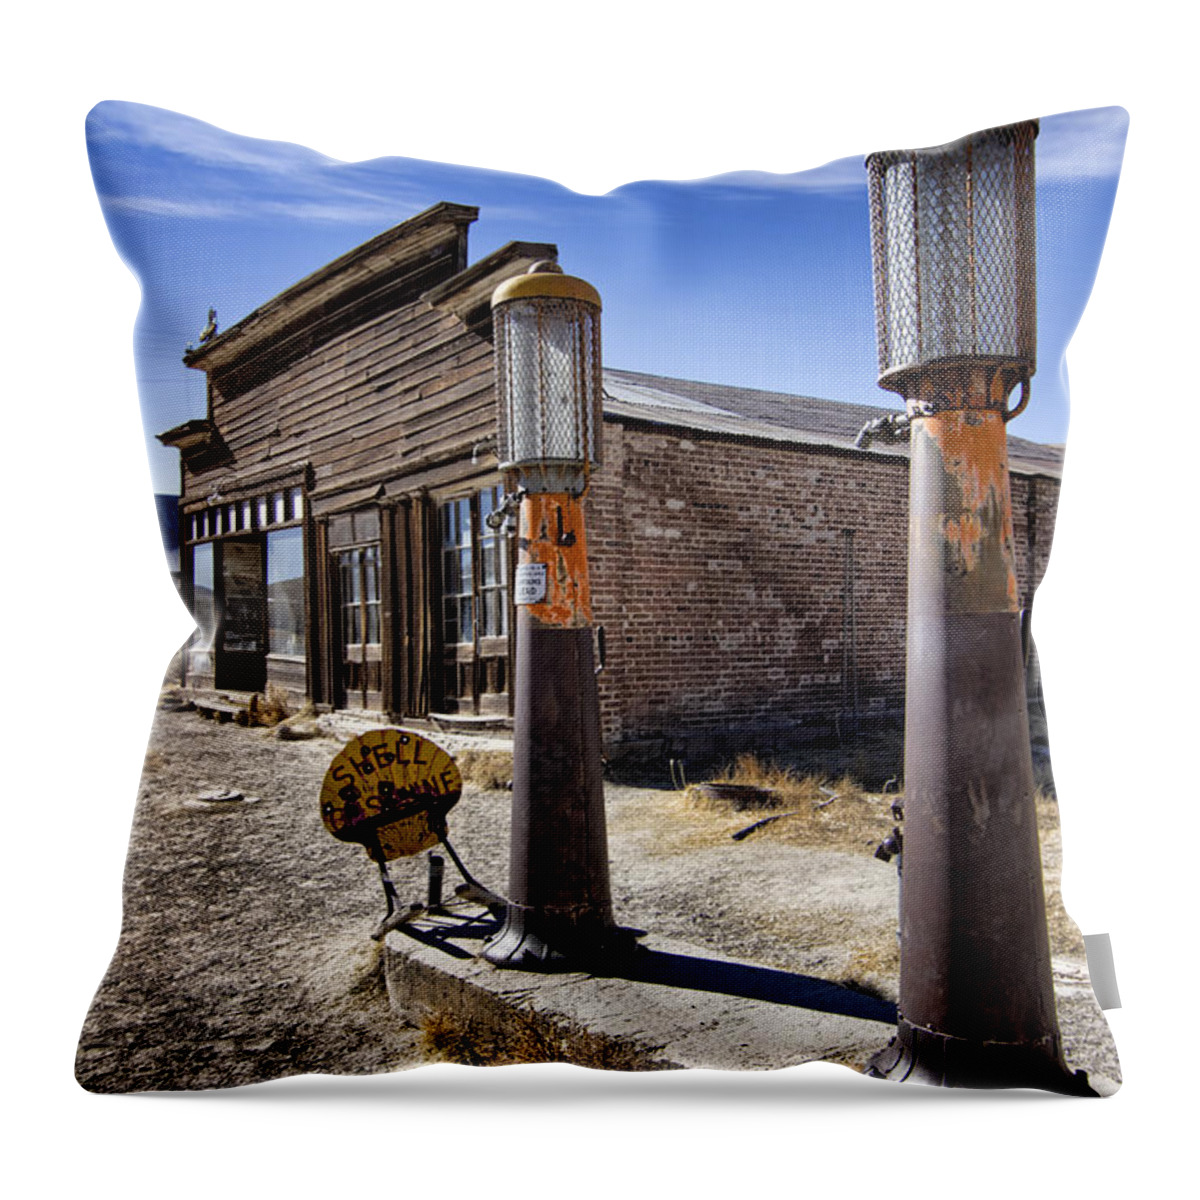 Gas Station Throw Pillow featuring the photograph Old West Gas Station by Jason Abando